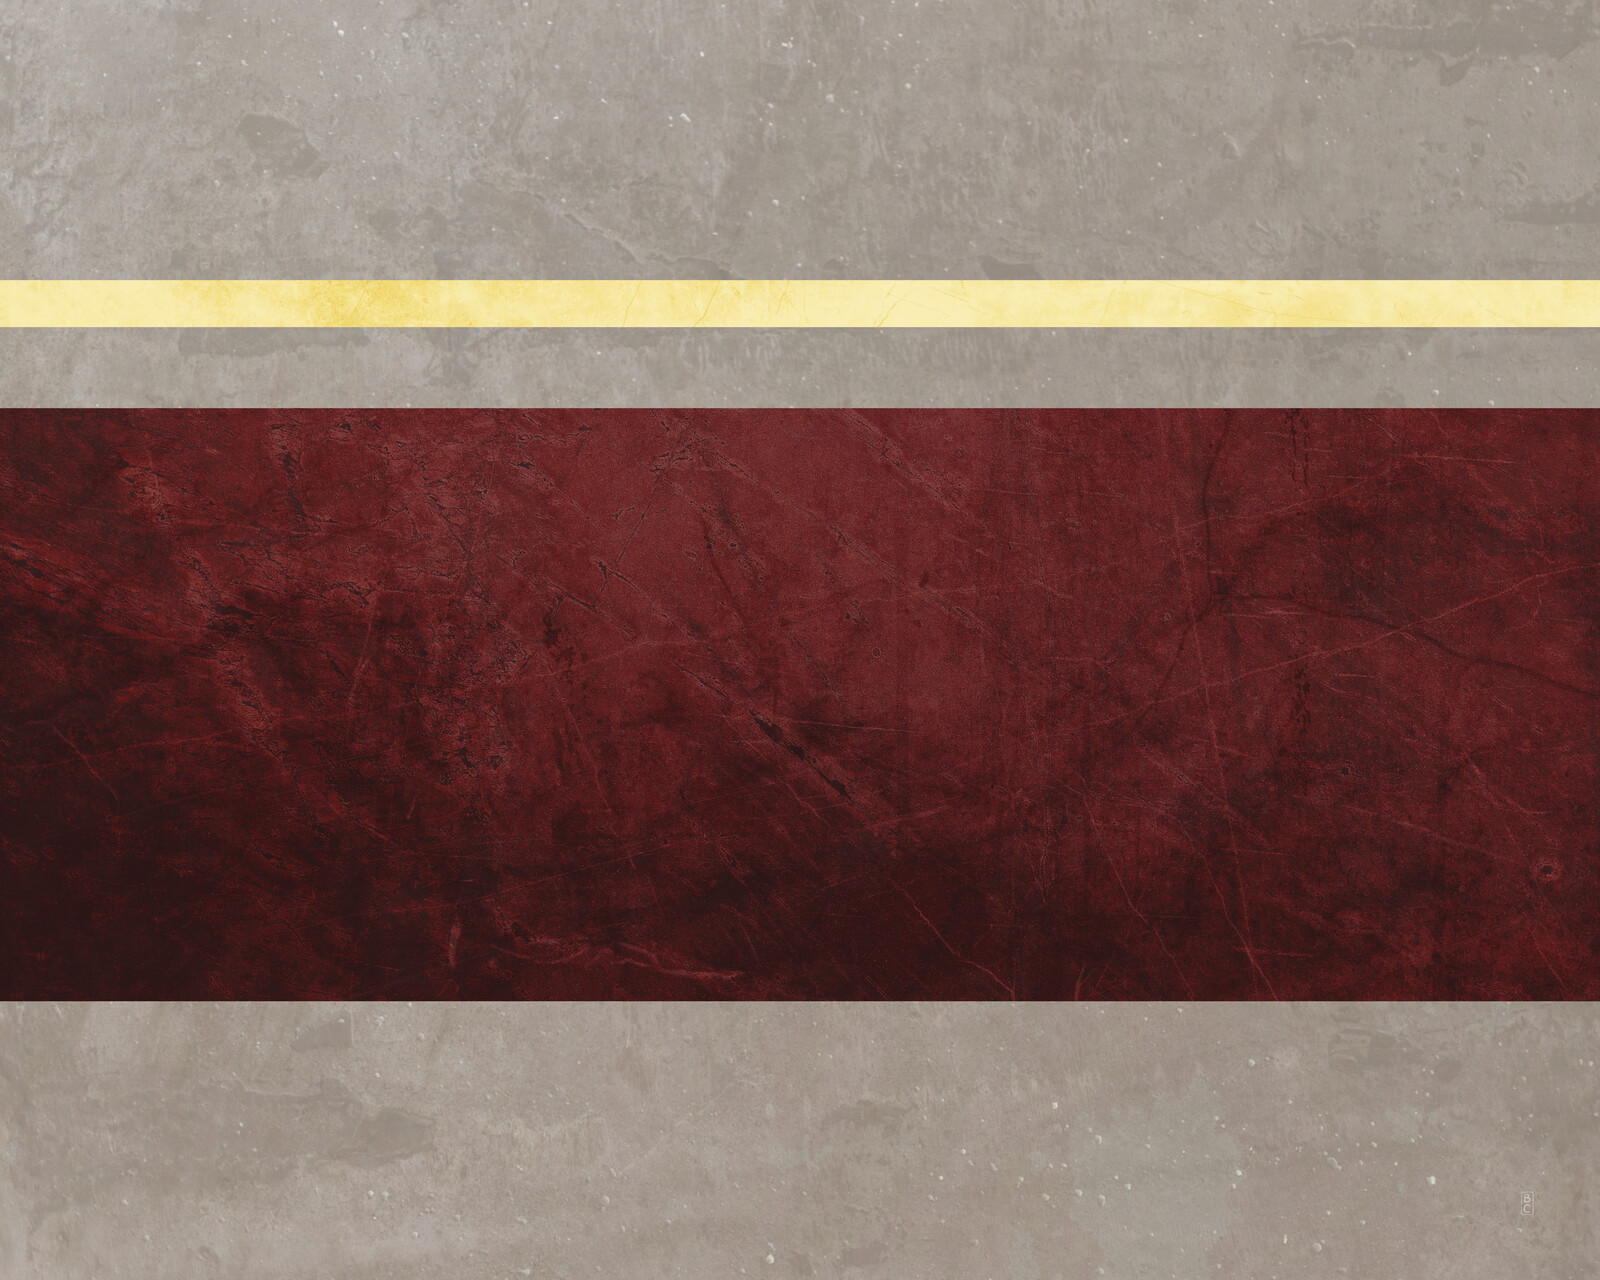 A thin horizontal yellow line above a thick horizontal red line, both extending across the entire canvas.